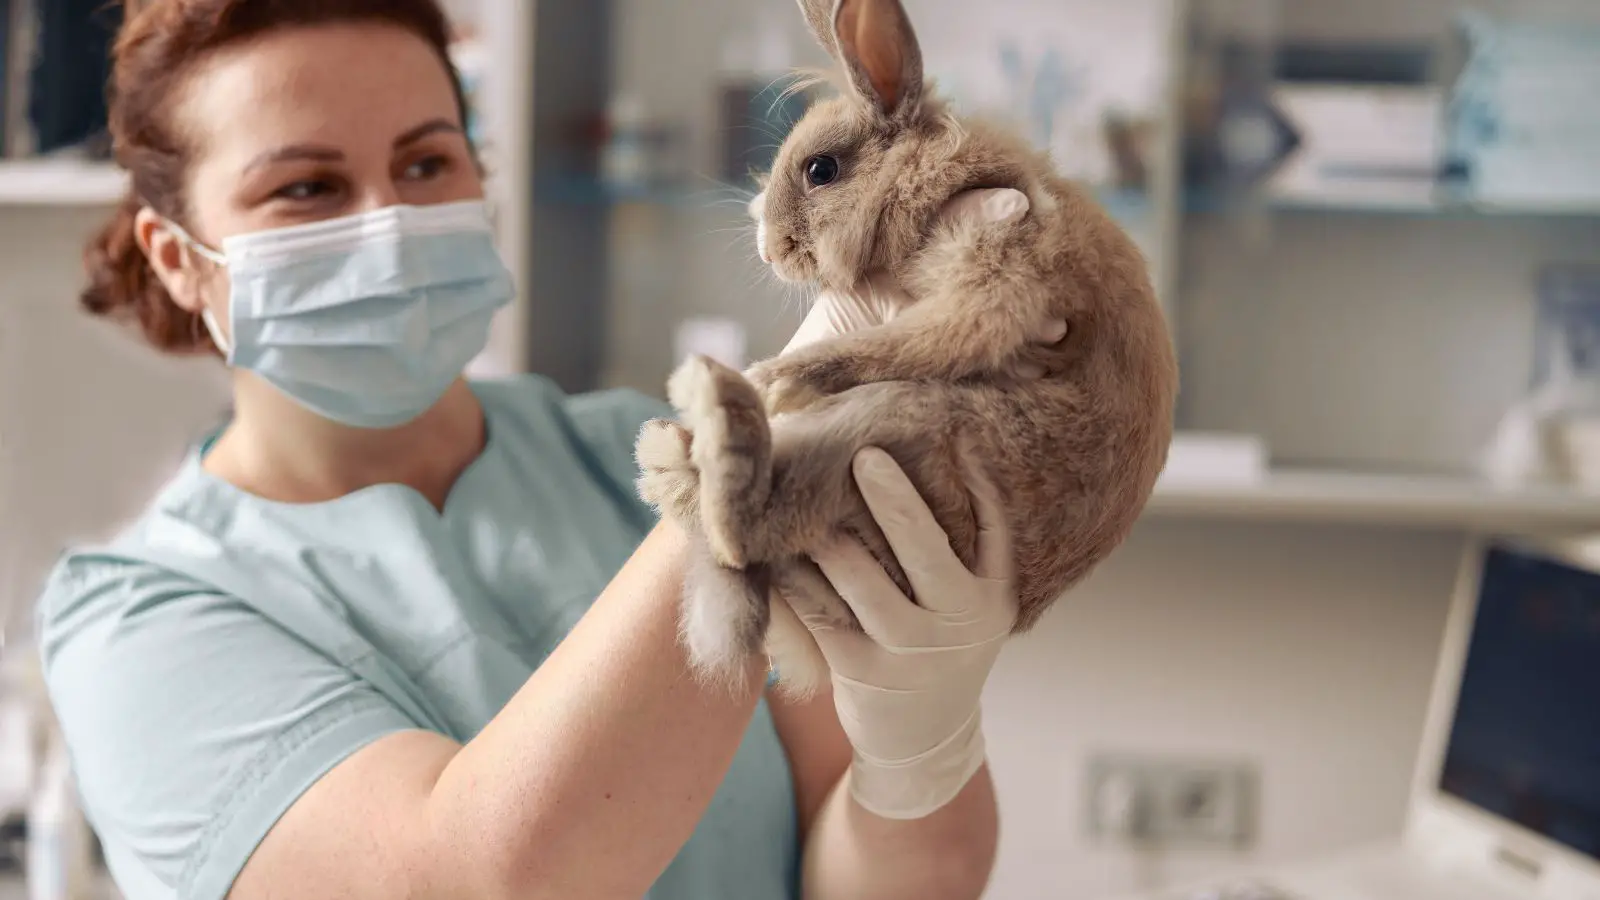 Neutering or spaying a bunny - abouteverythingpets.com